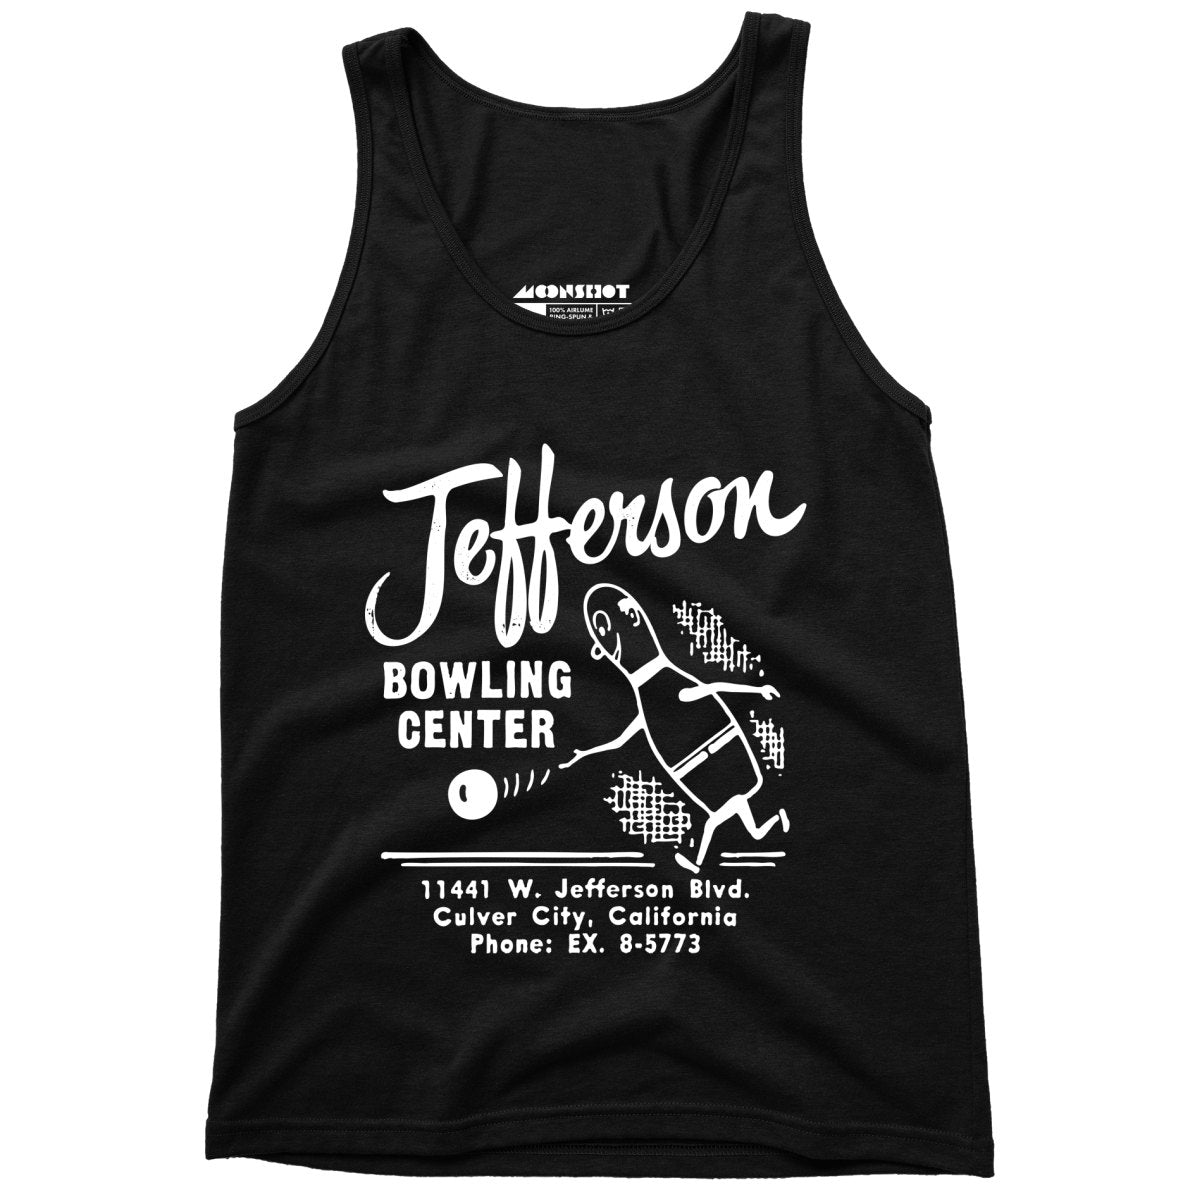 Jefferson Bowling Center - Culver City, CA - Vintage Bowling Alley - Unisex Tank Top